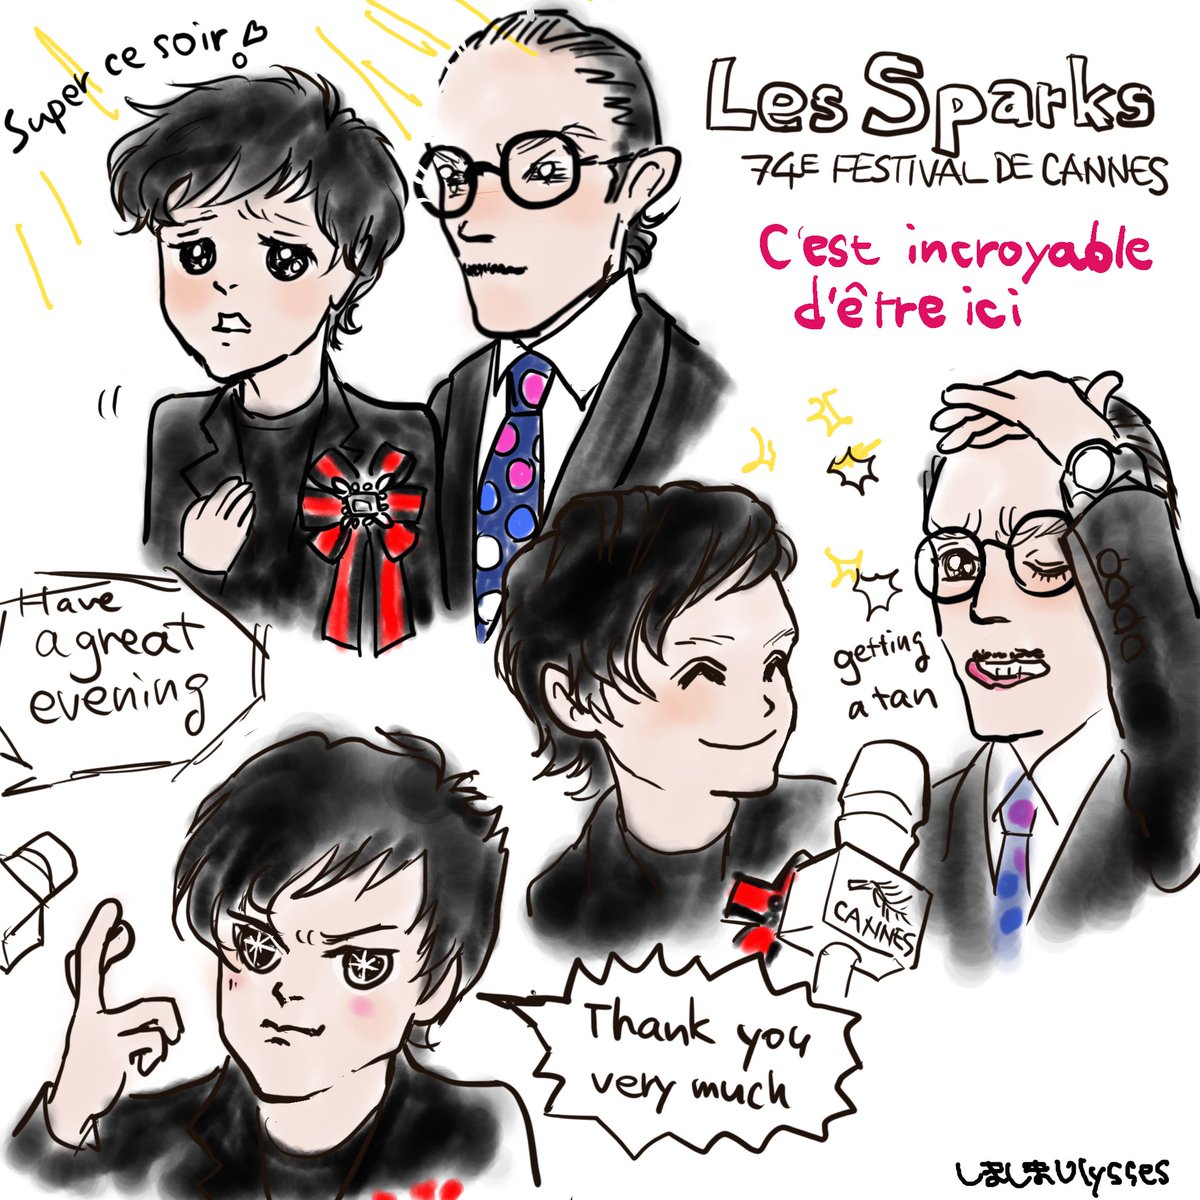 Continuing from yesterday…I love a short #sparks interview at Cannes 2021 red carpet. #sparksfanart #cannes2021 #スパークス